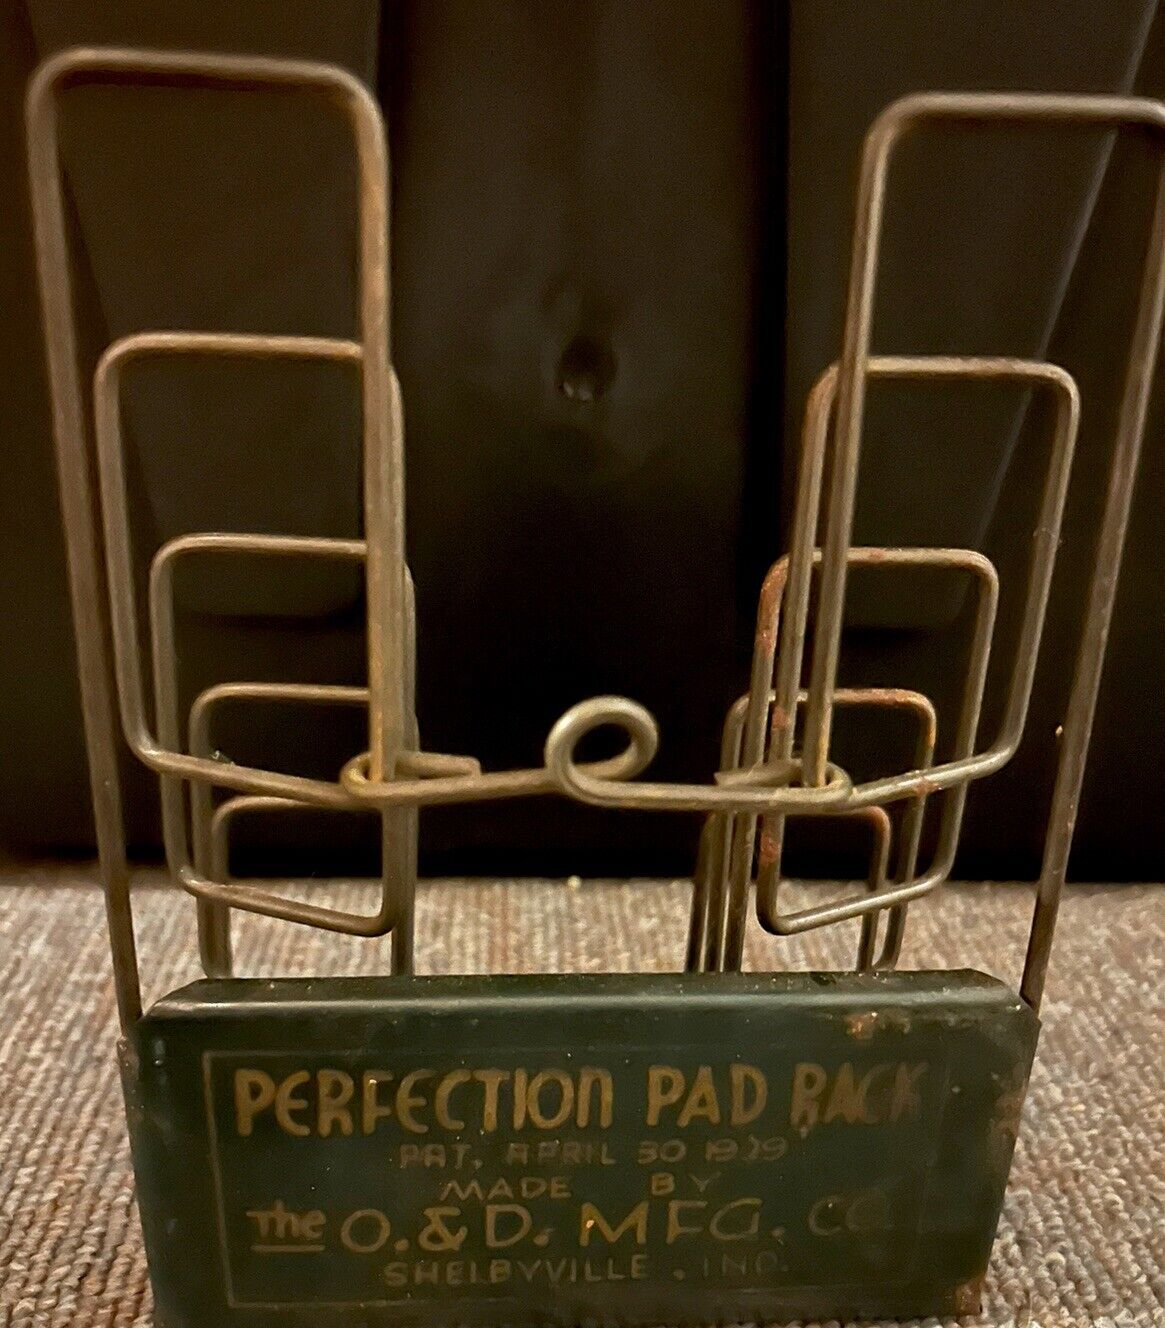 Vintage Perfection Pad Rack Made By The O&D MFG Company 1929 Antique